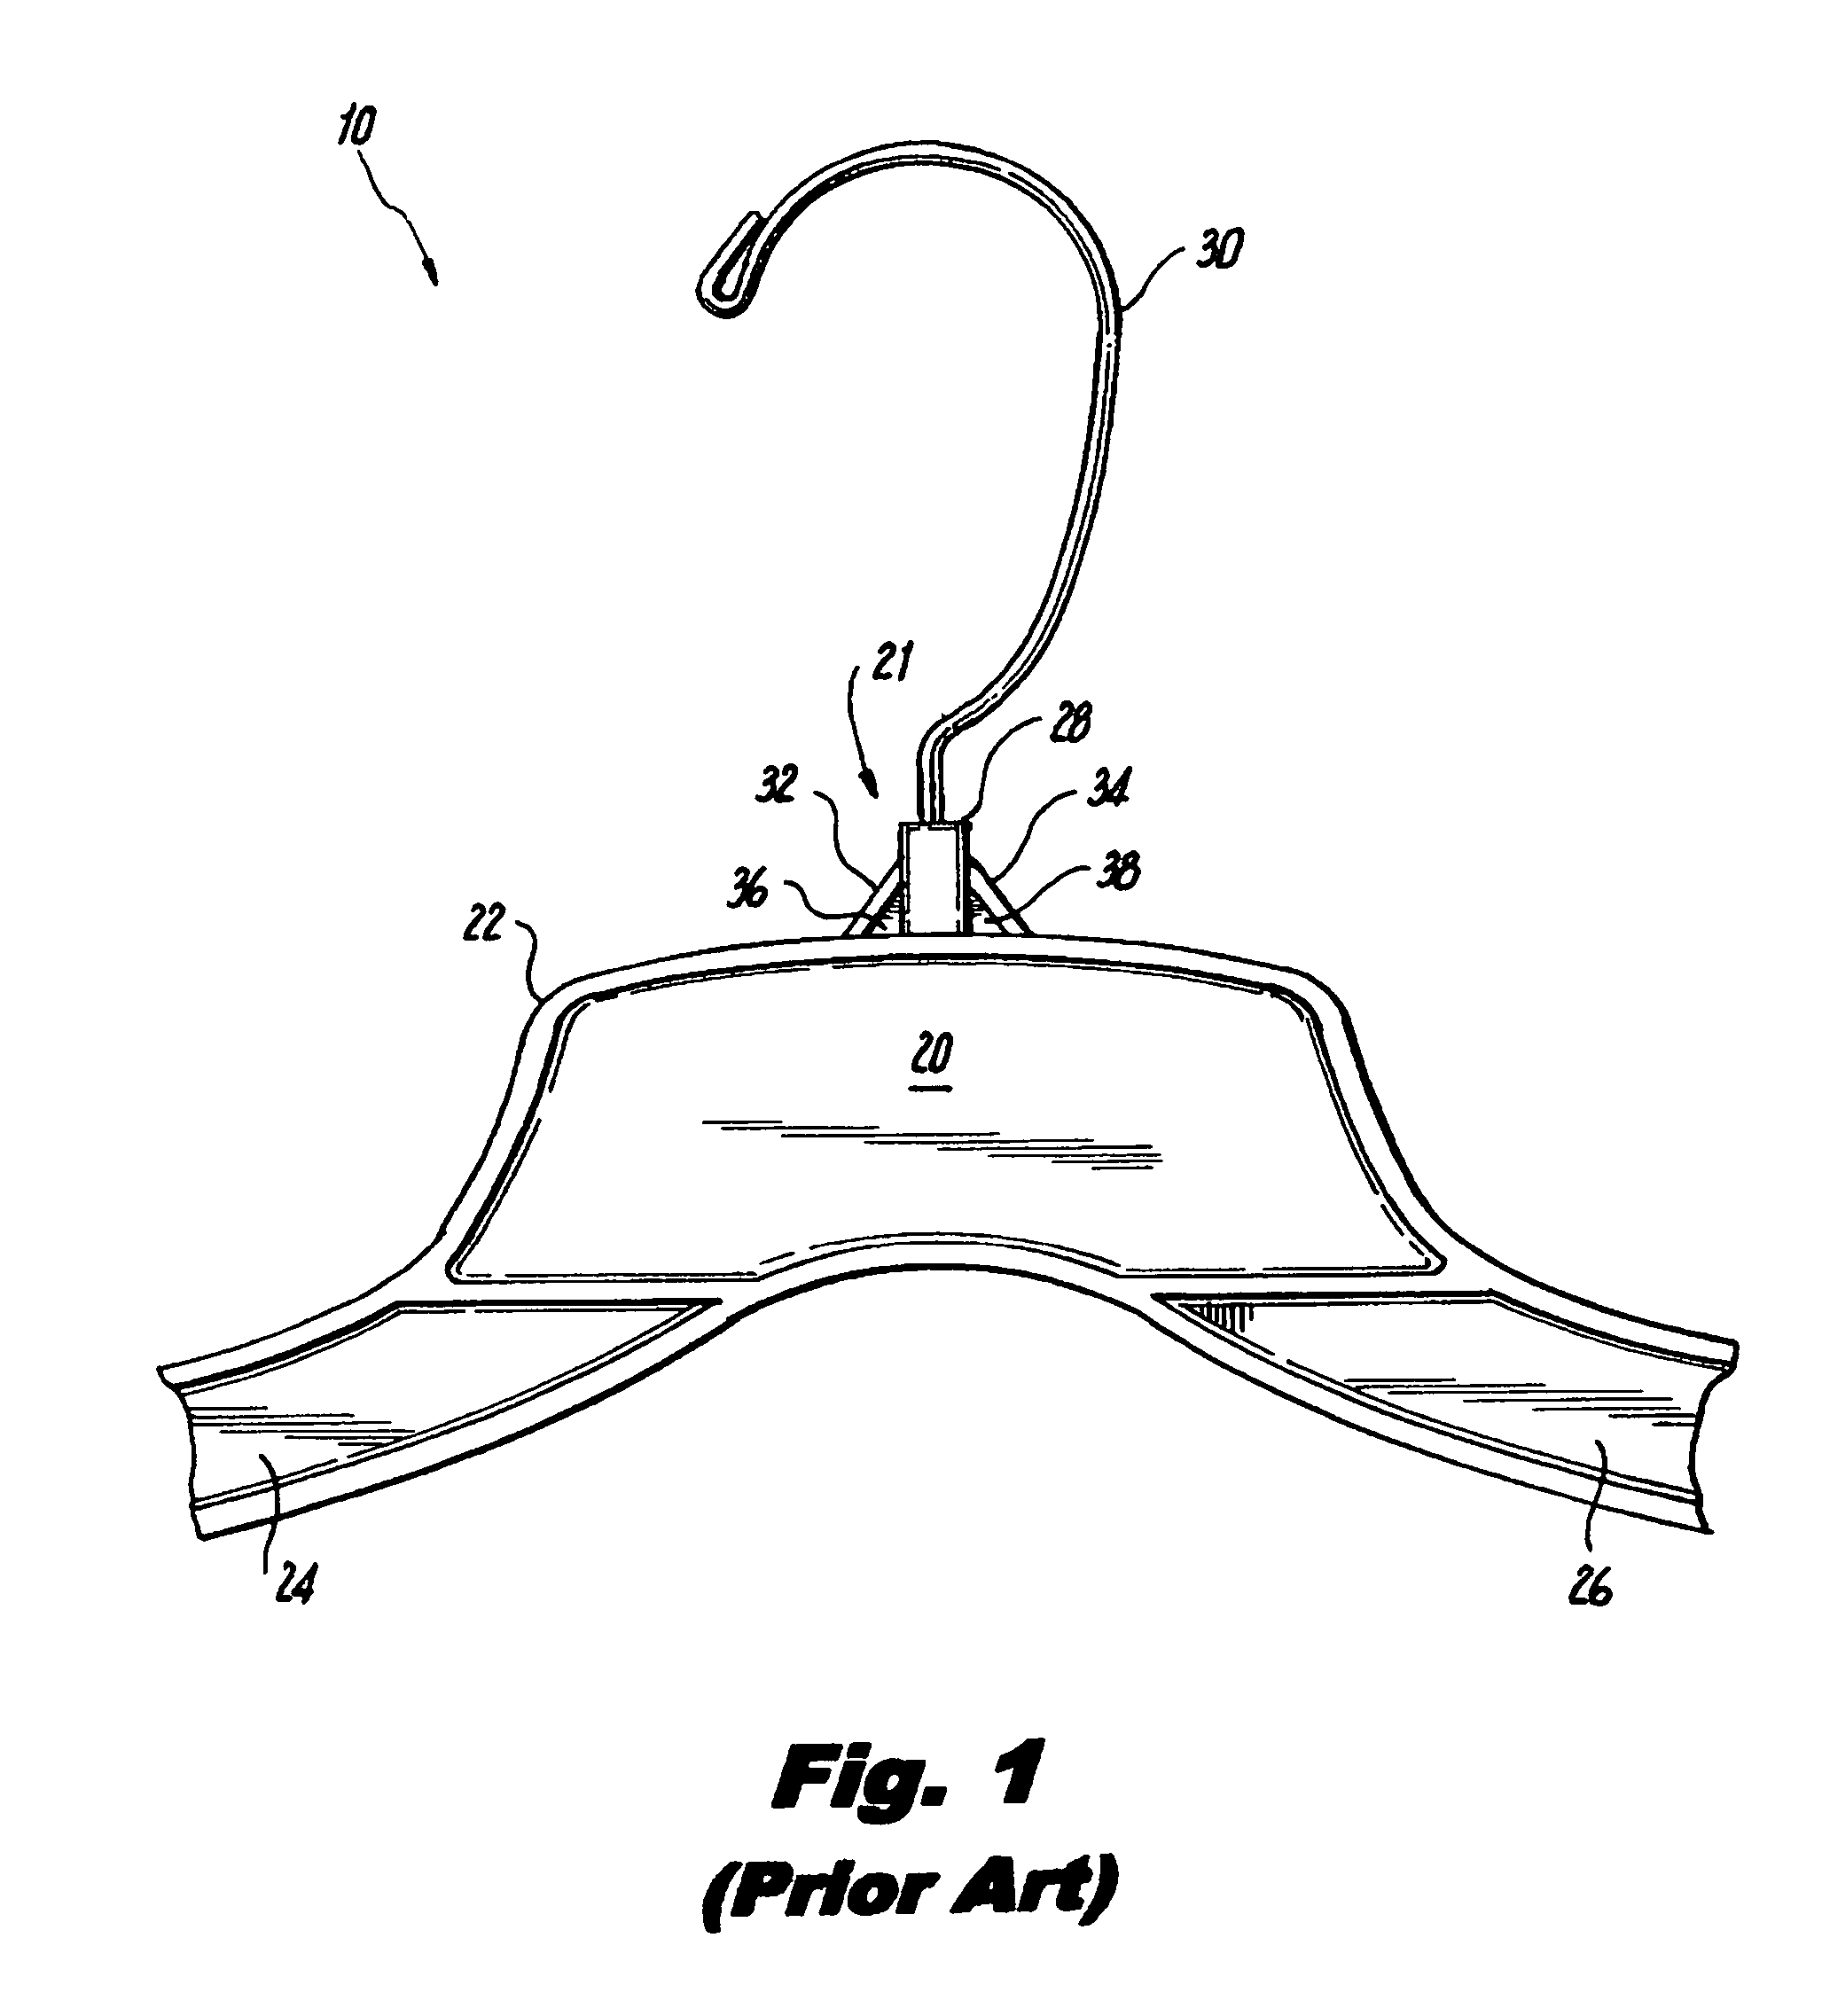 Lower neck indicator for wire hook hangers